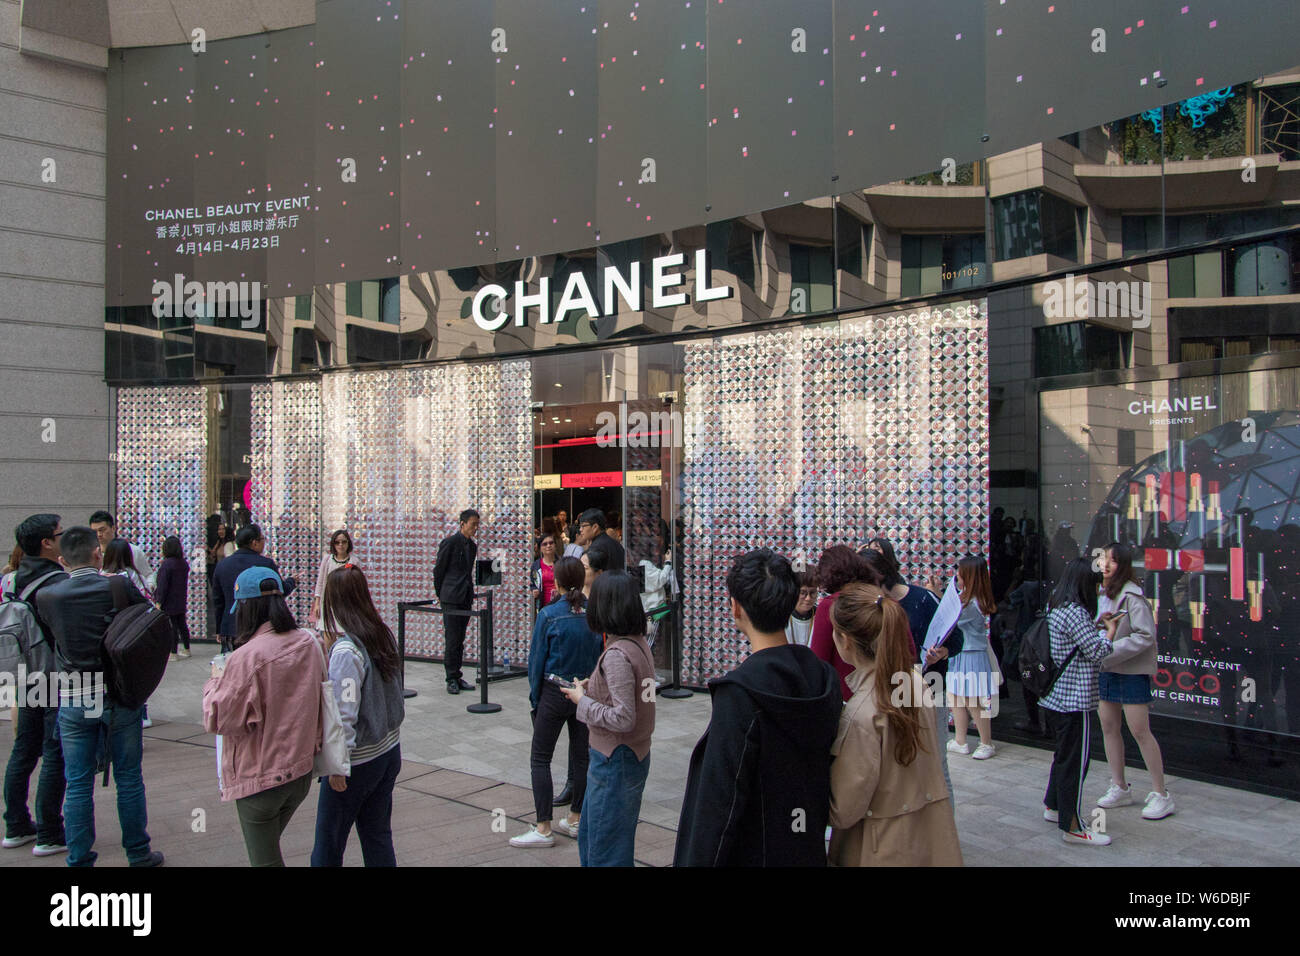 Customers queue up to get the makeup from Chanel Beauty Event in